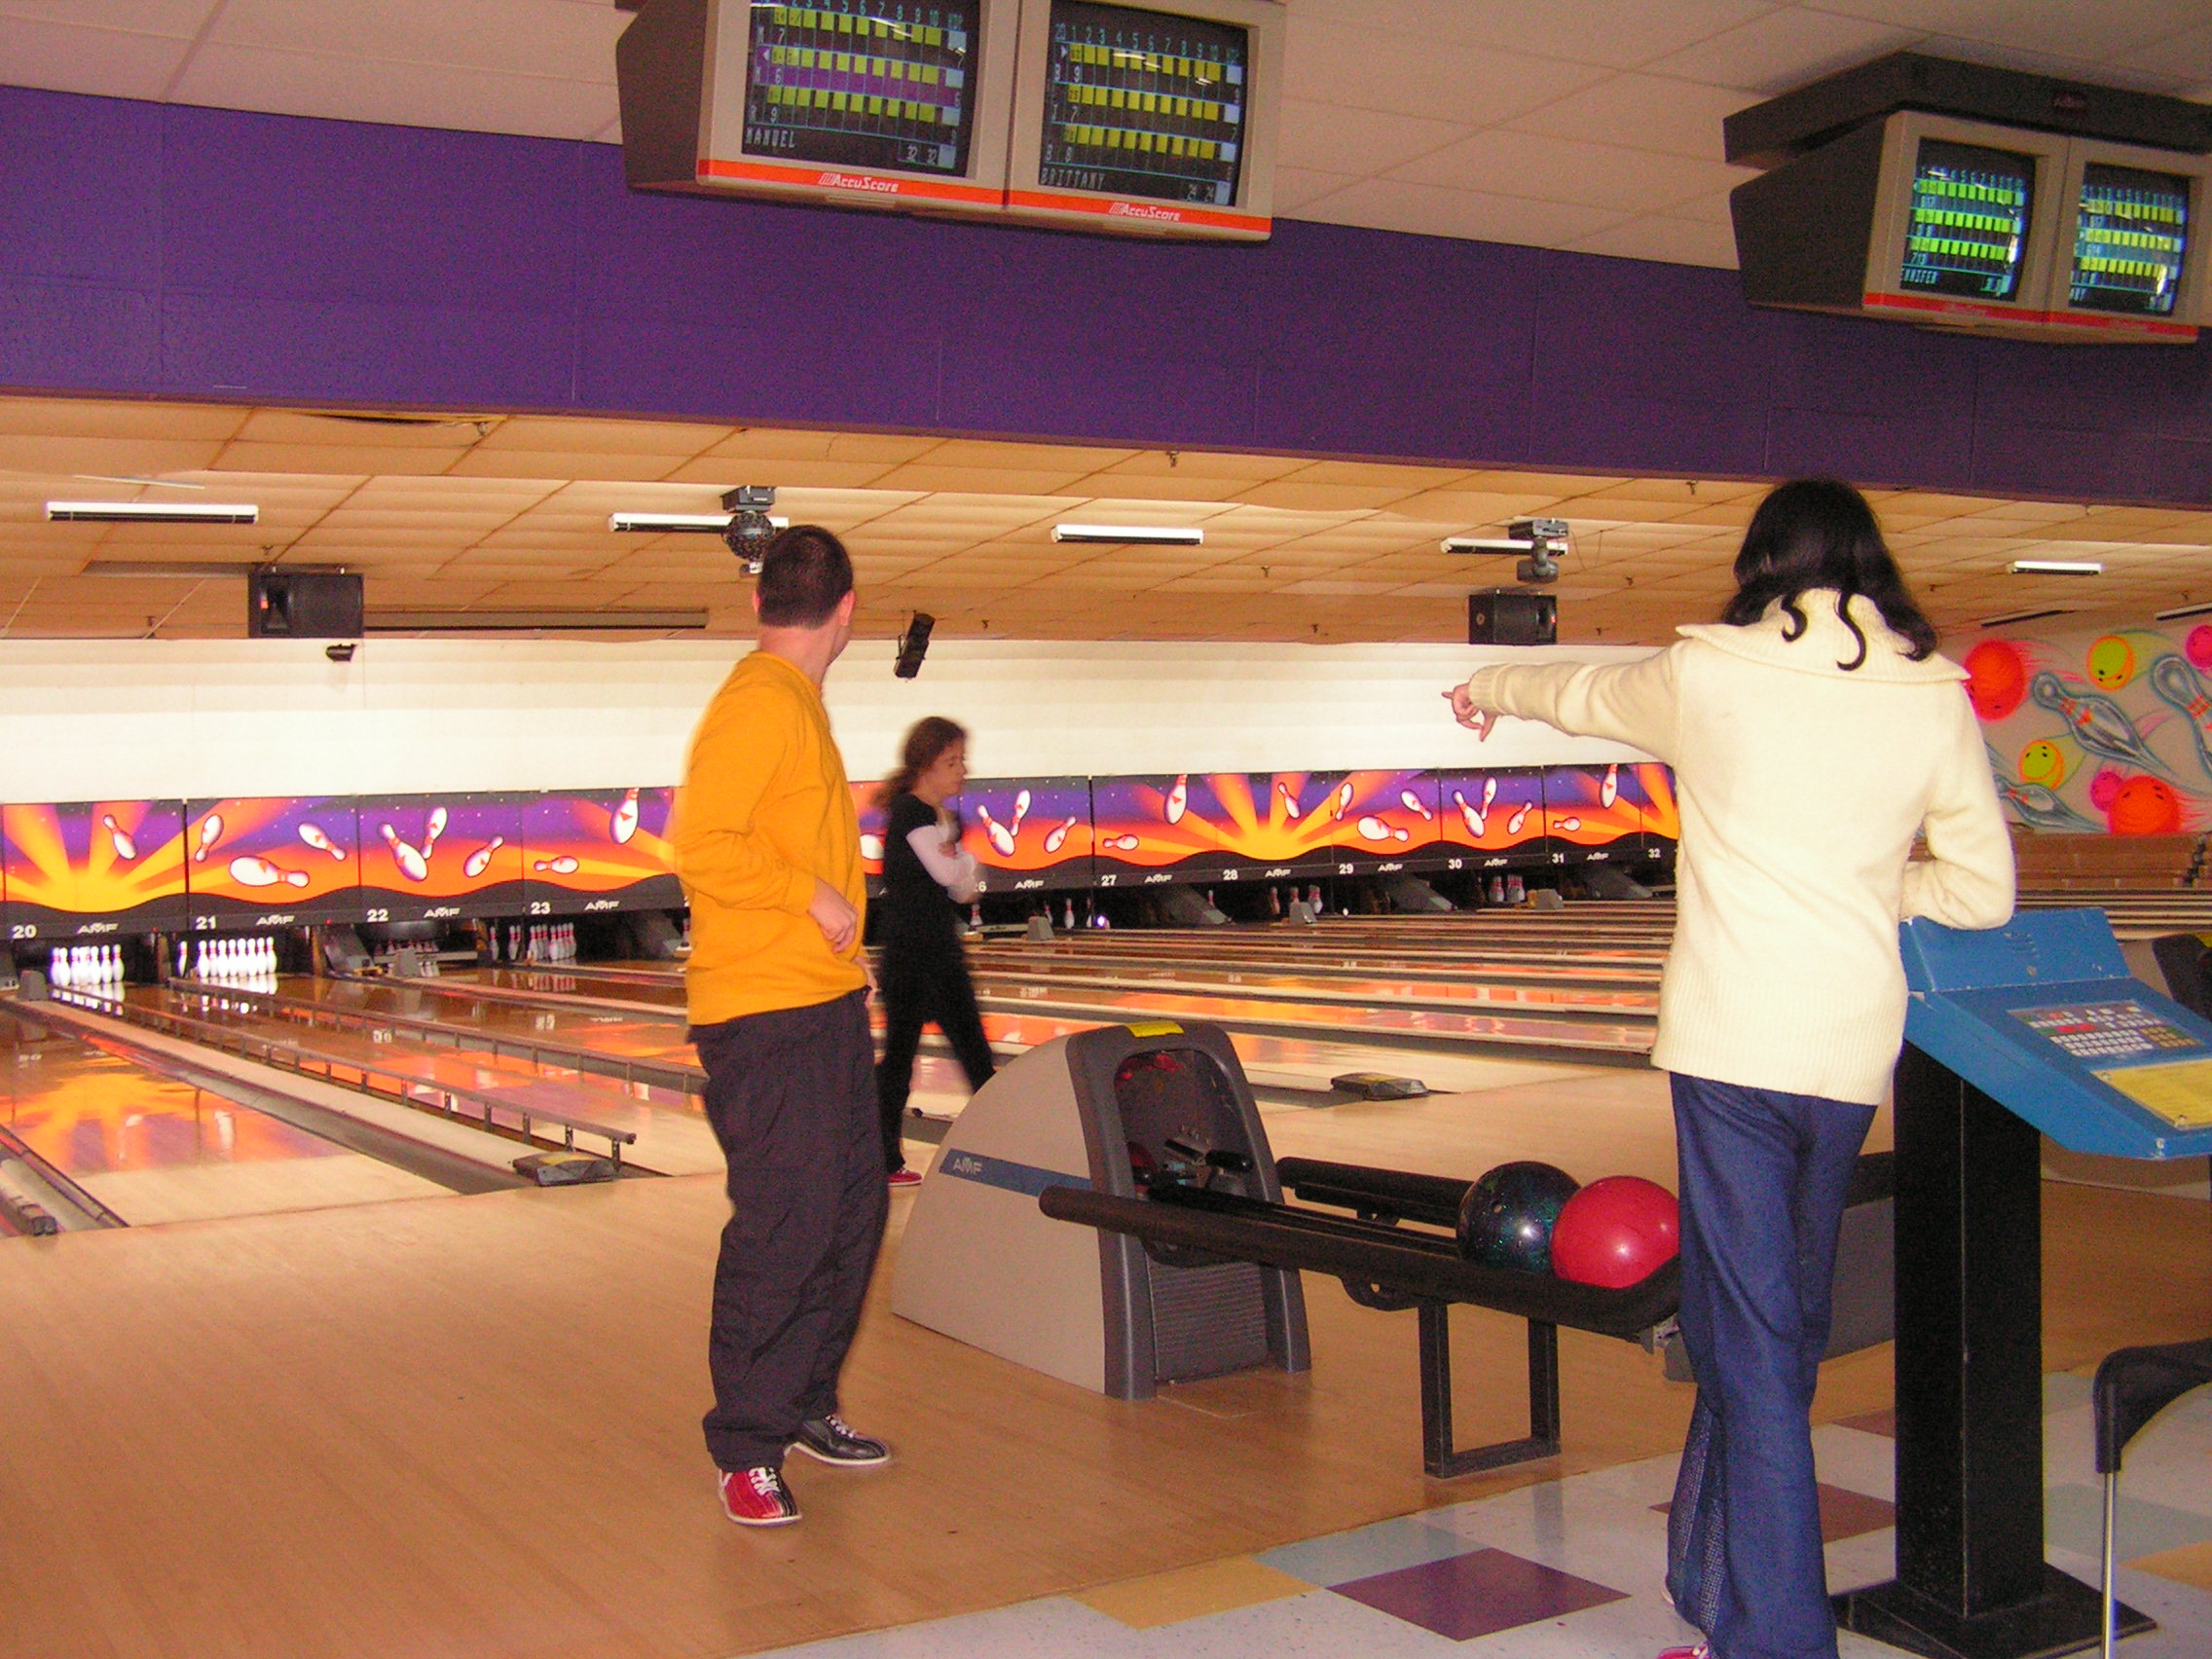 ./2006/Special Olympics Bowling/SOBowlingPractice.jpg